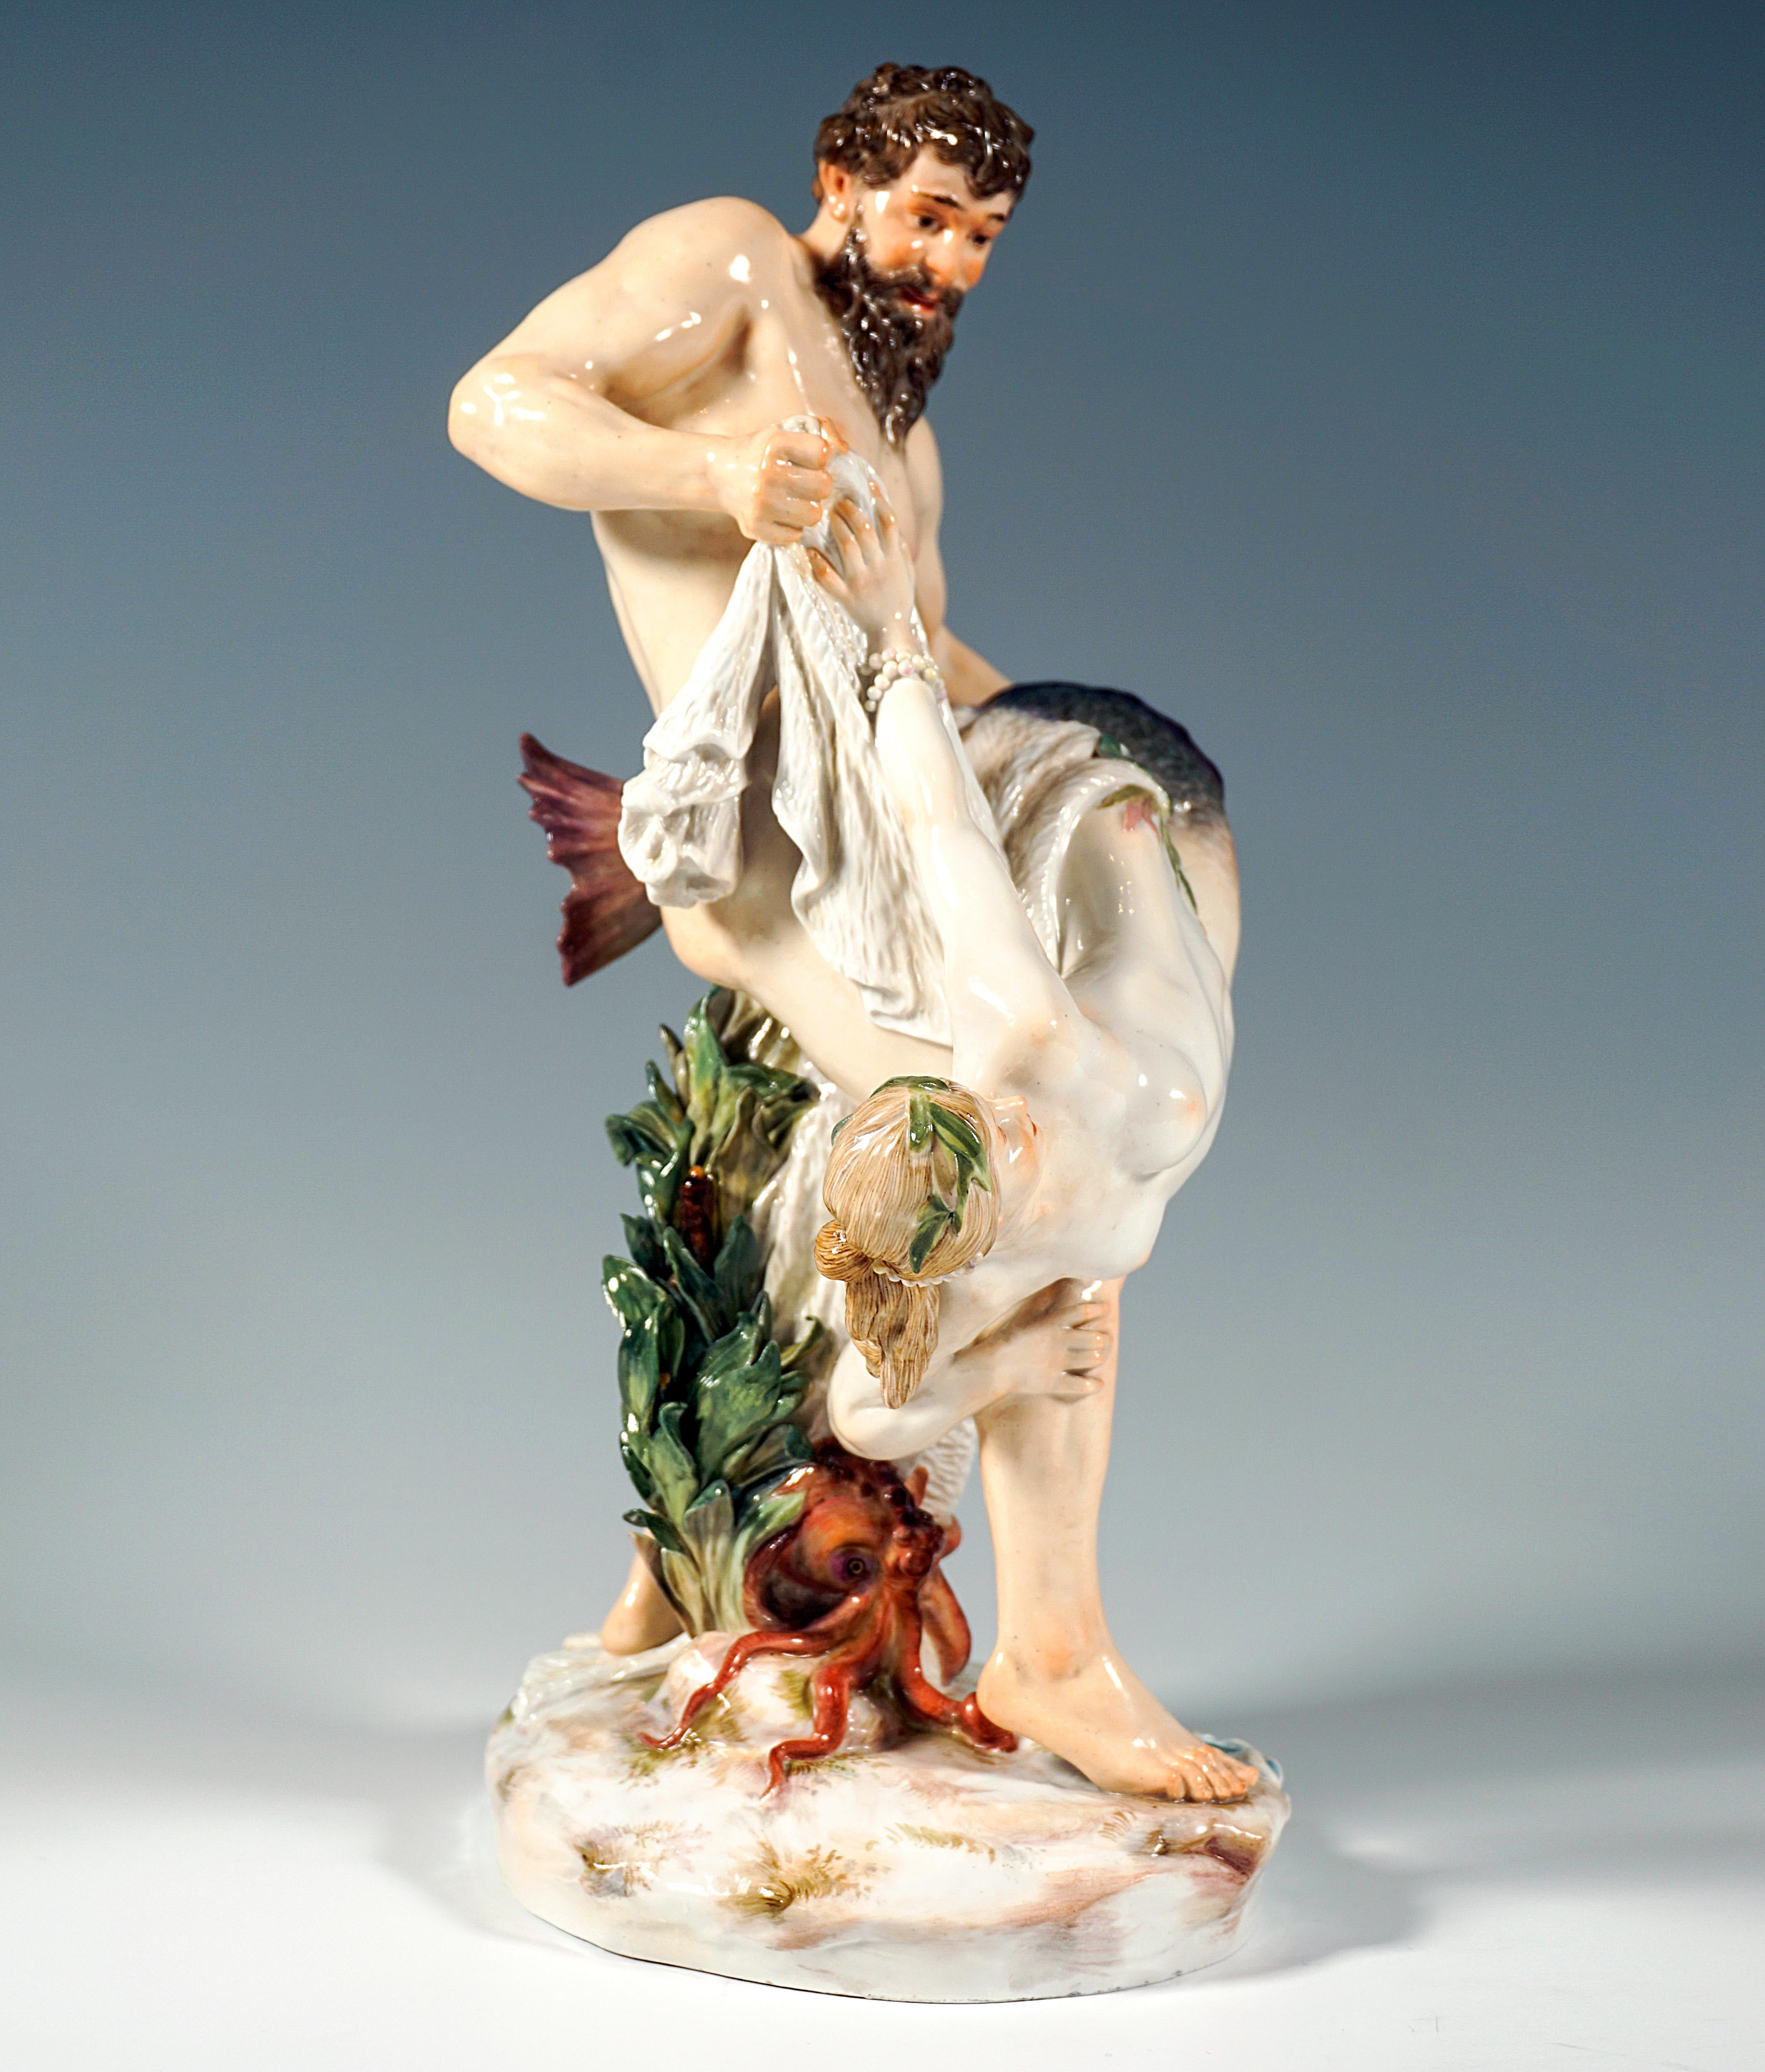 Exquisite Large Meissen Art Nouveau Porcelain Group:
Exceptional, detailed depiction of an unclothed sturdy, fisherman with thick beard, freeing his catch, a beautiful mermaid adorned with pearl ribbons and aquatic plants with two intertwined fins,